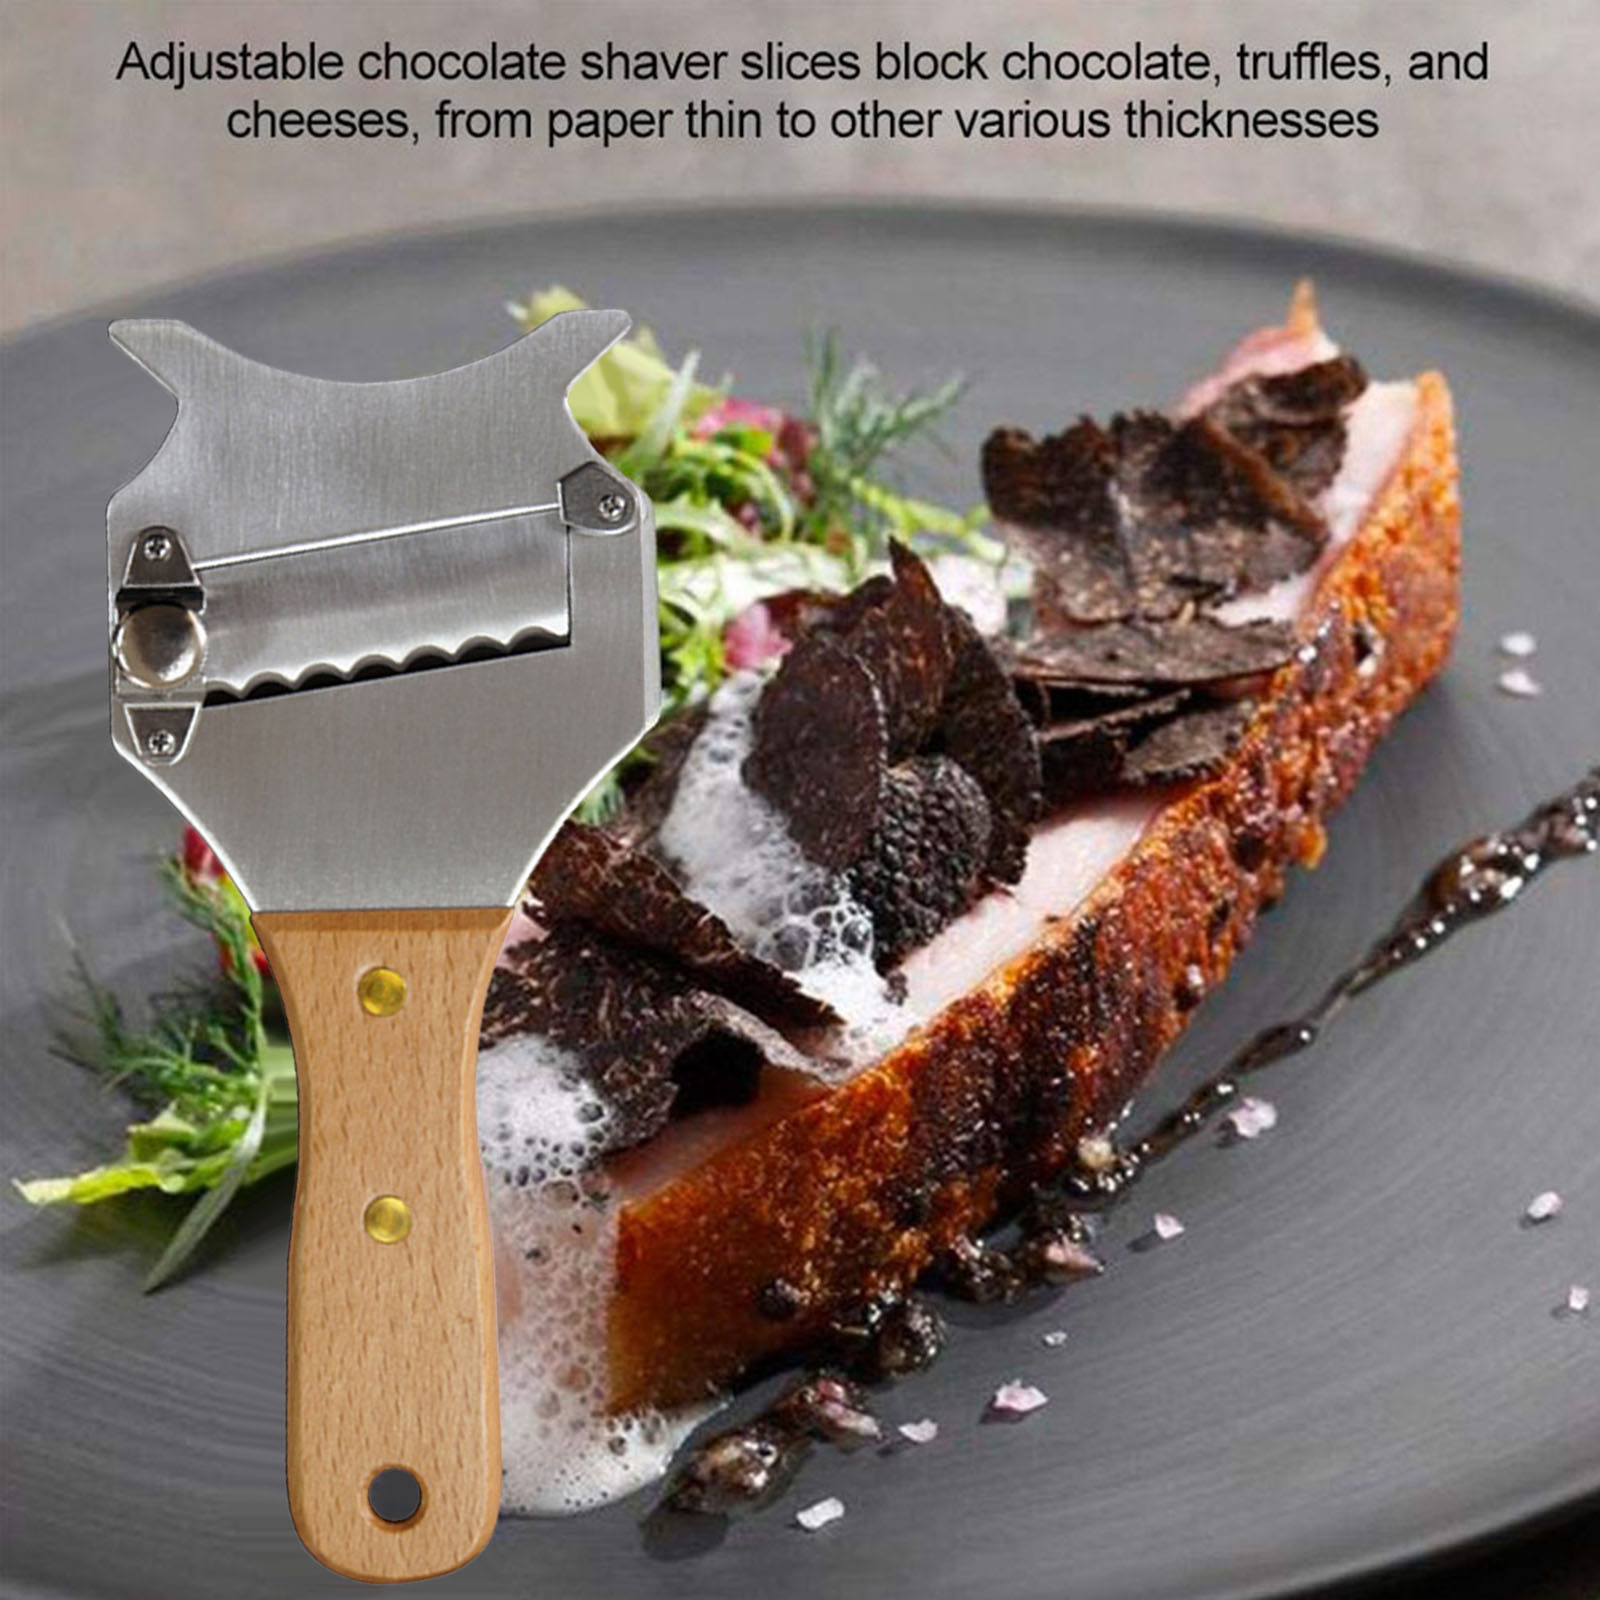 Durable Stainless Steel Truffle Cheese Slicer Adjustable Blade Chocolate Shaver for Kitchen Gadget Shaver Razor Dessert Tool